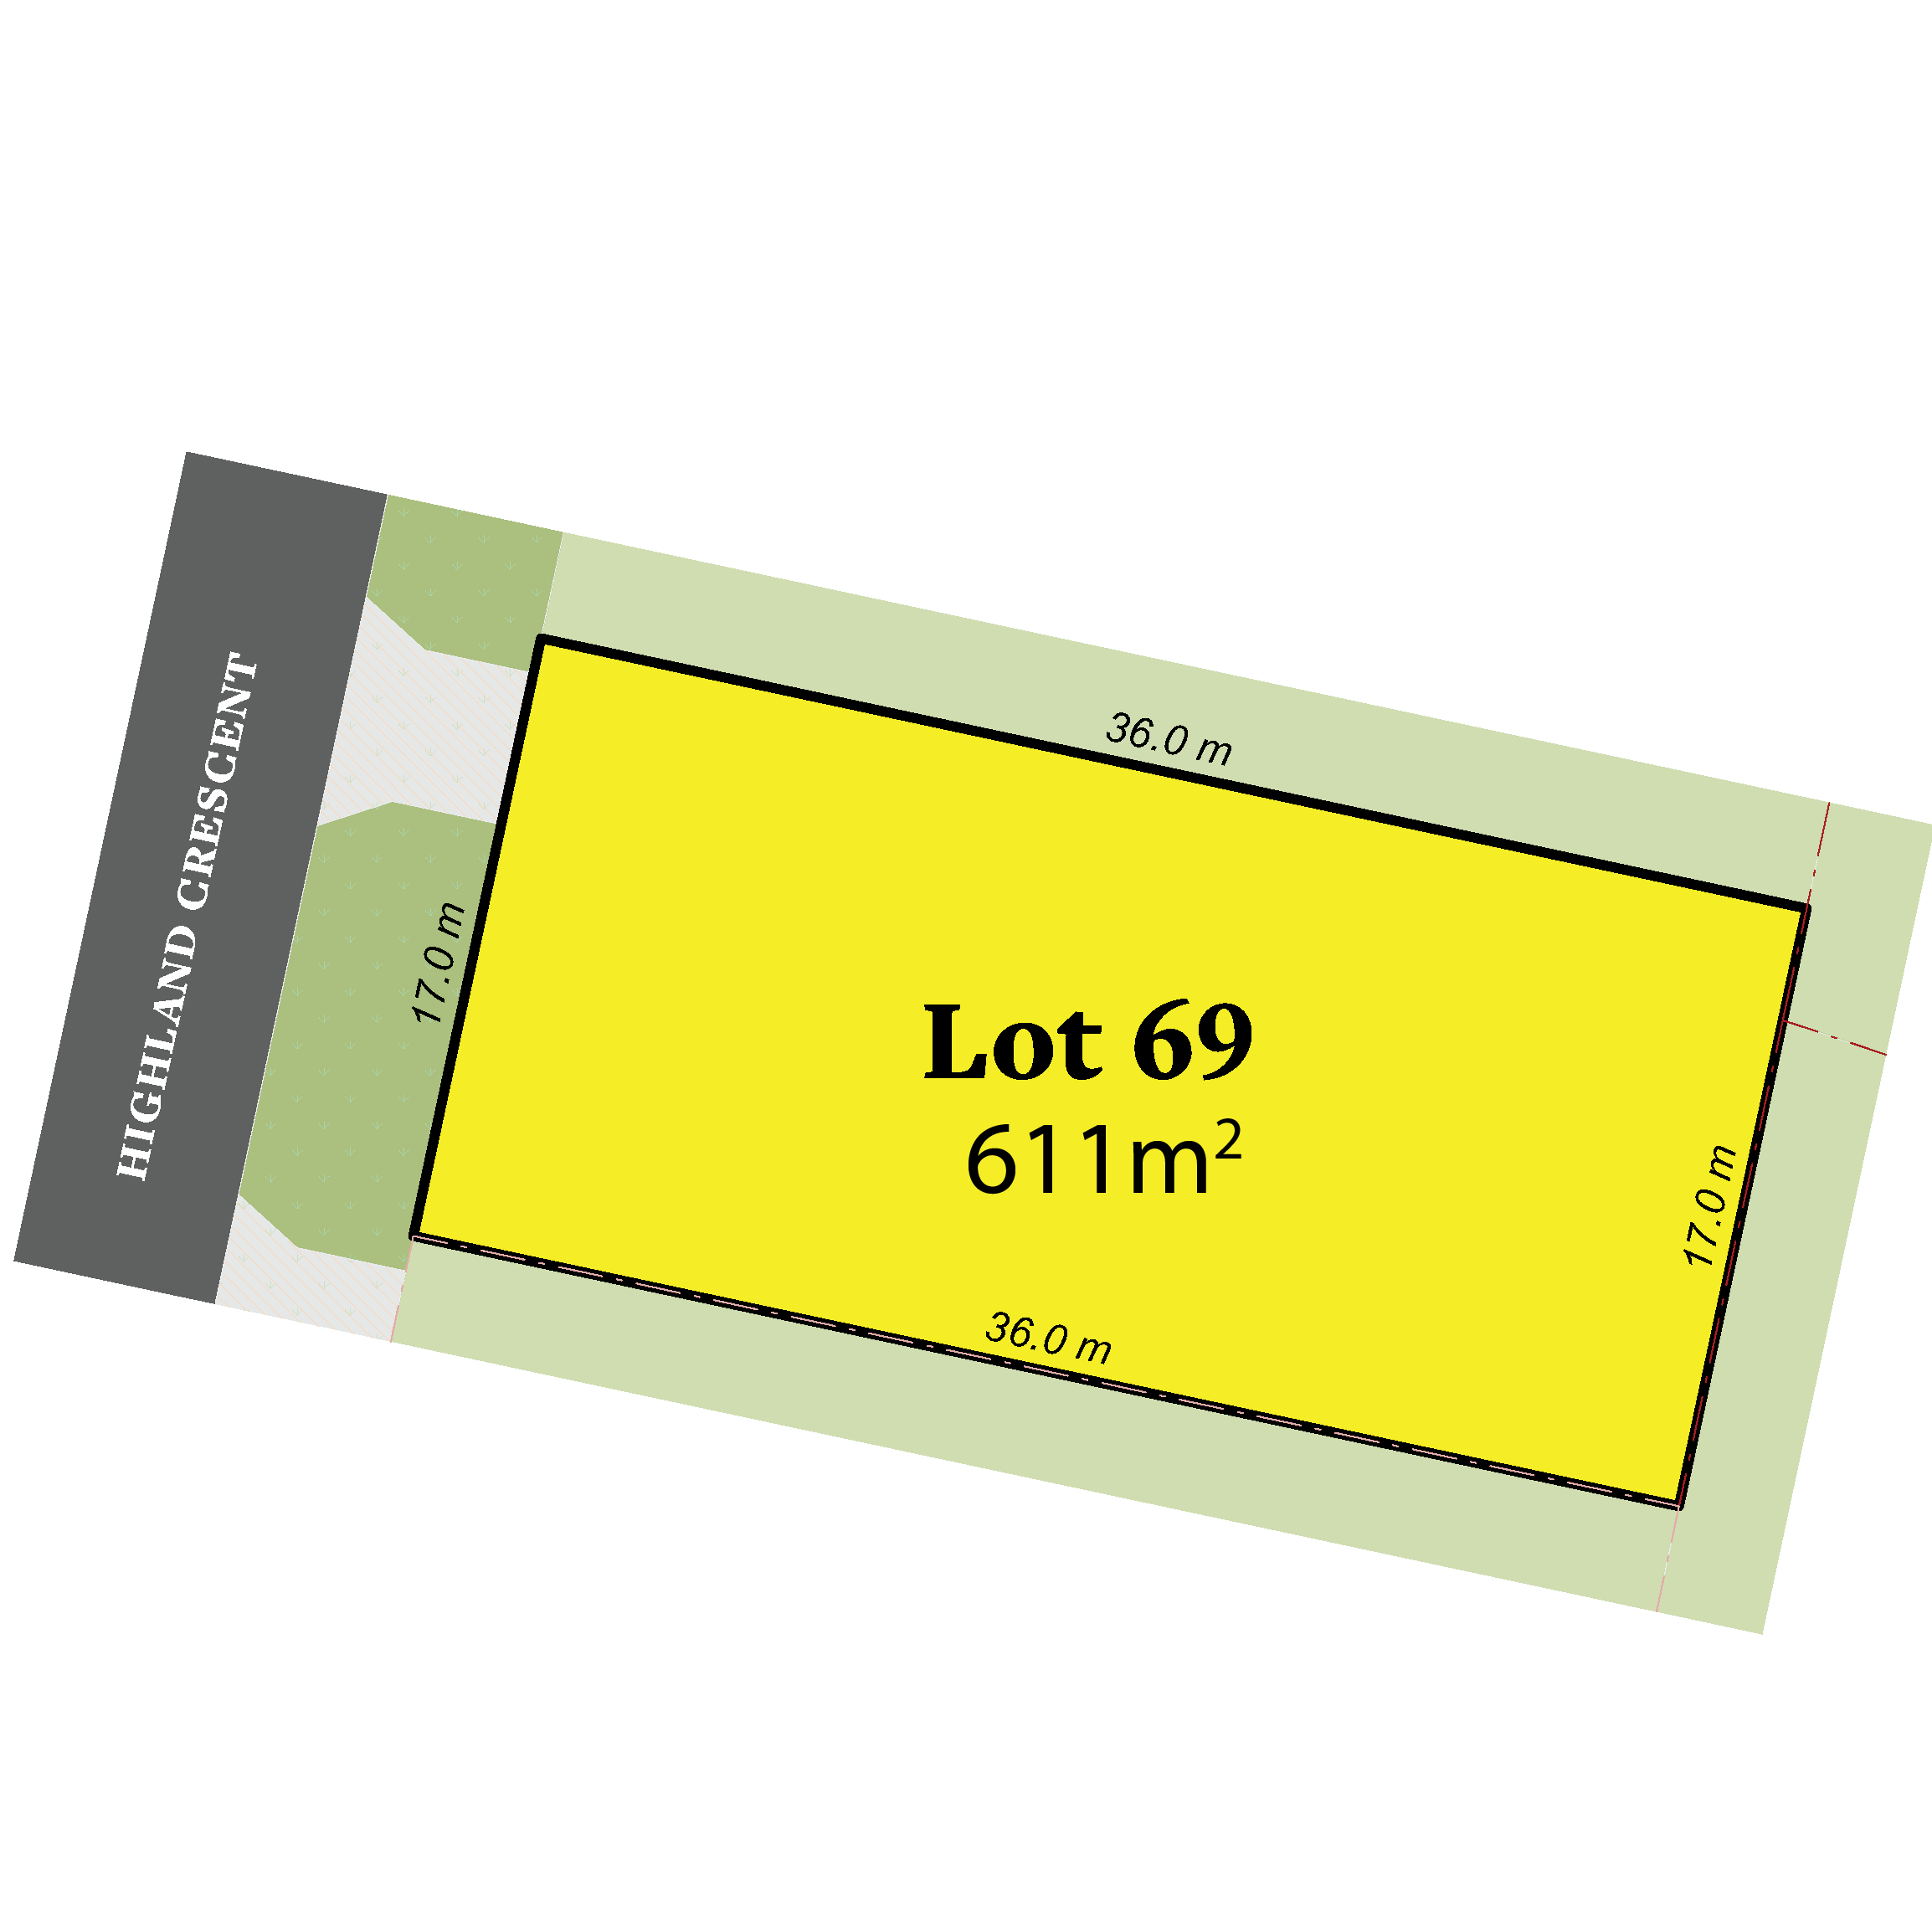 Image of Lot 69